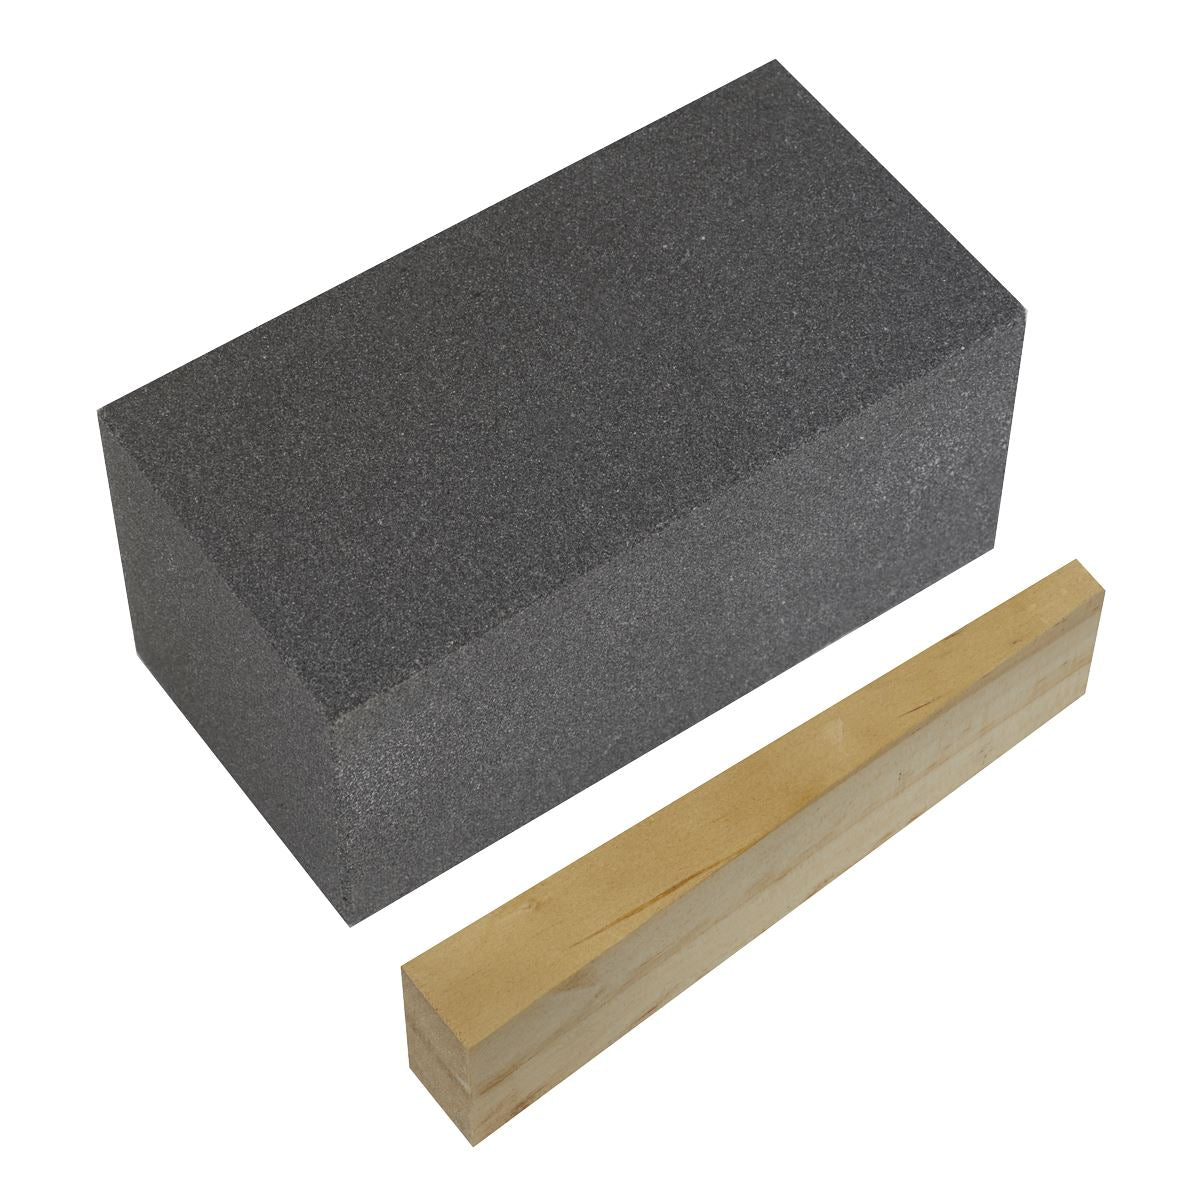 Worksafe by Sealey Floor Grinding Block 50 x 50 x 100mm 120Grit - Pack of 6